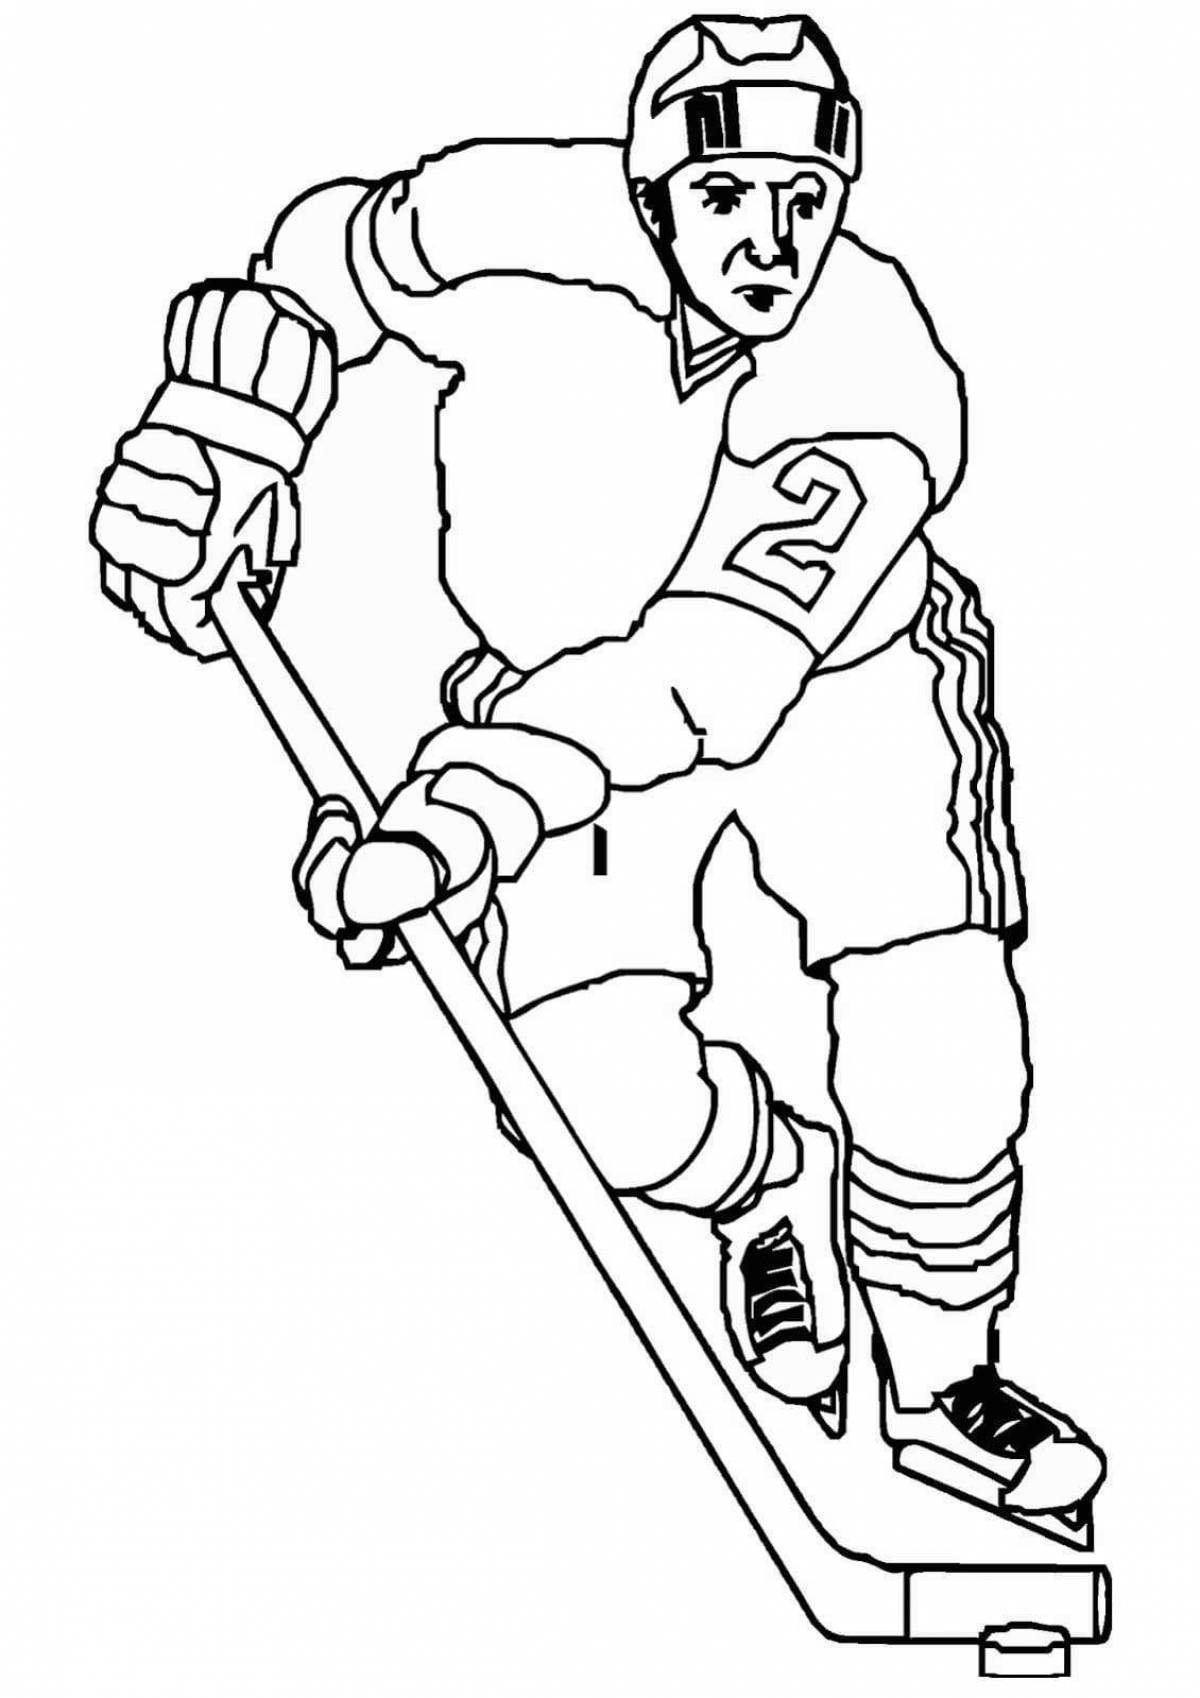 Entertaining hockey coloring book for kids